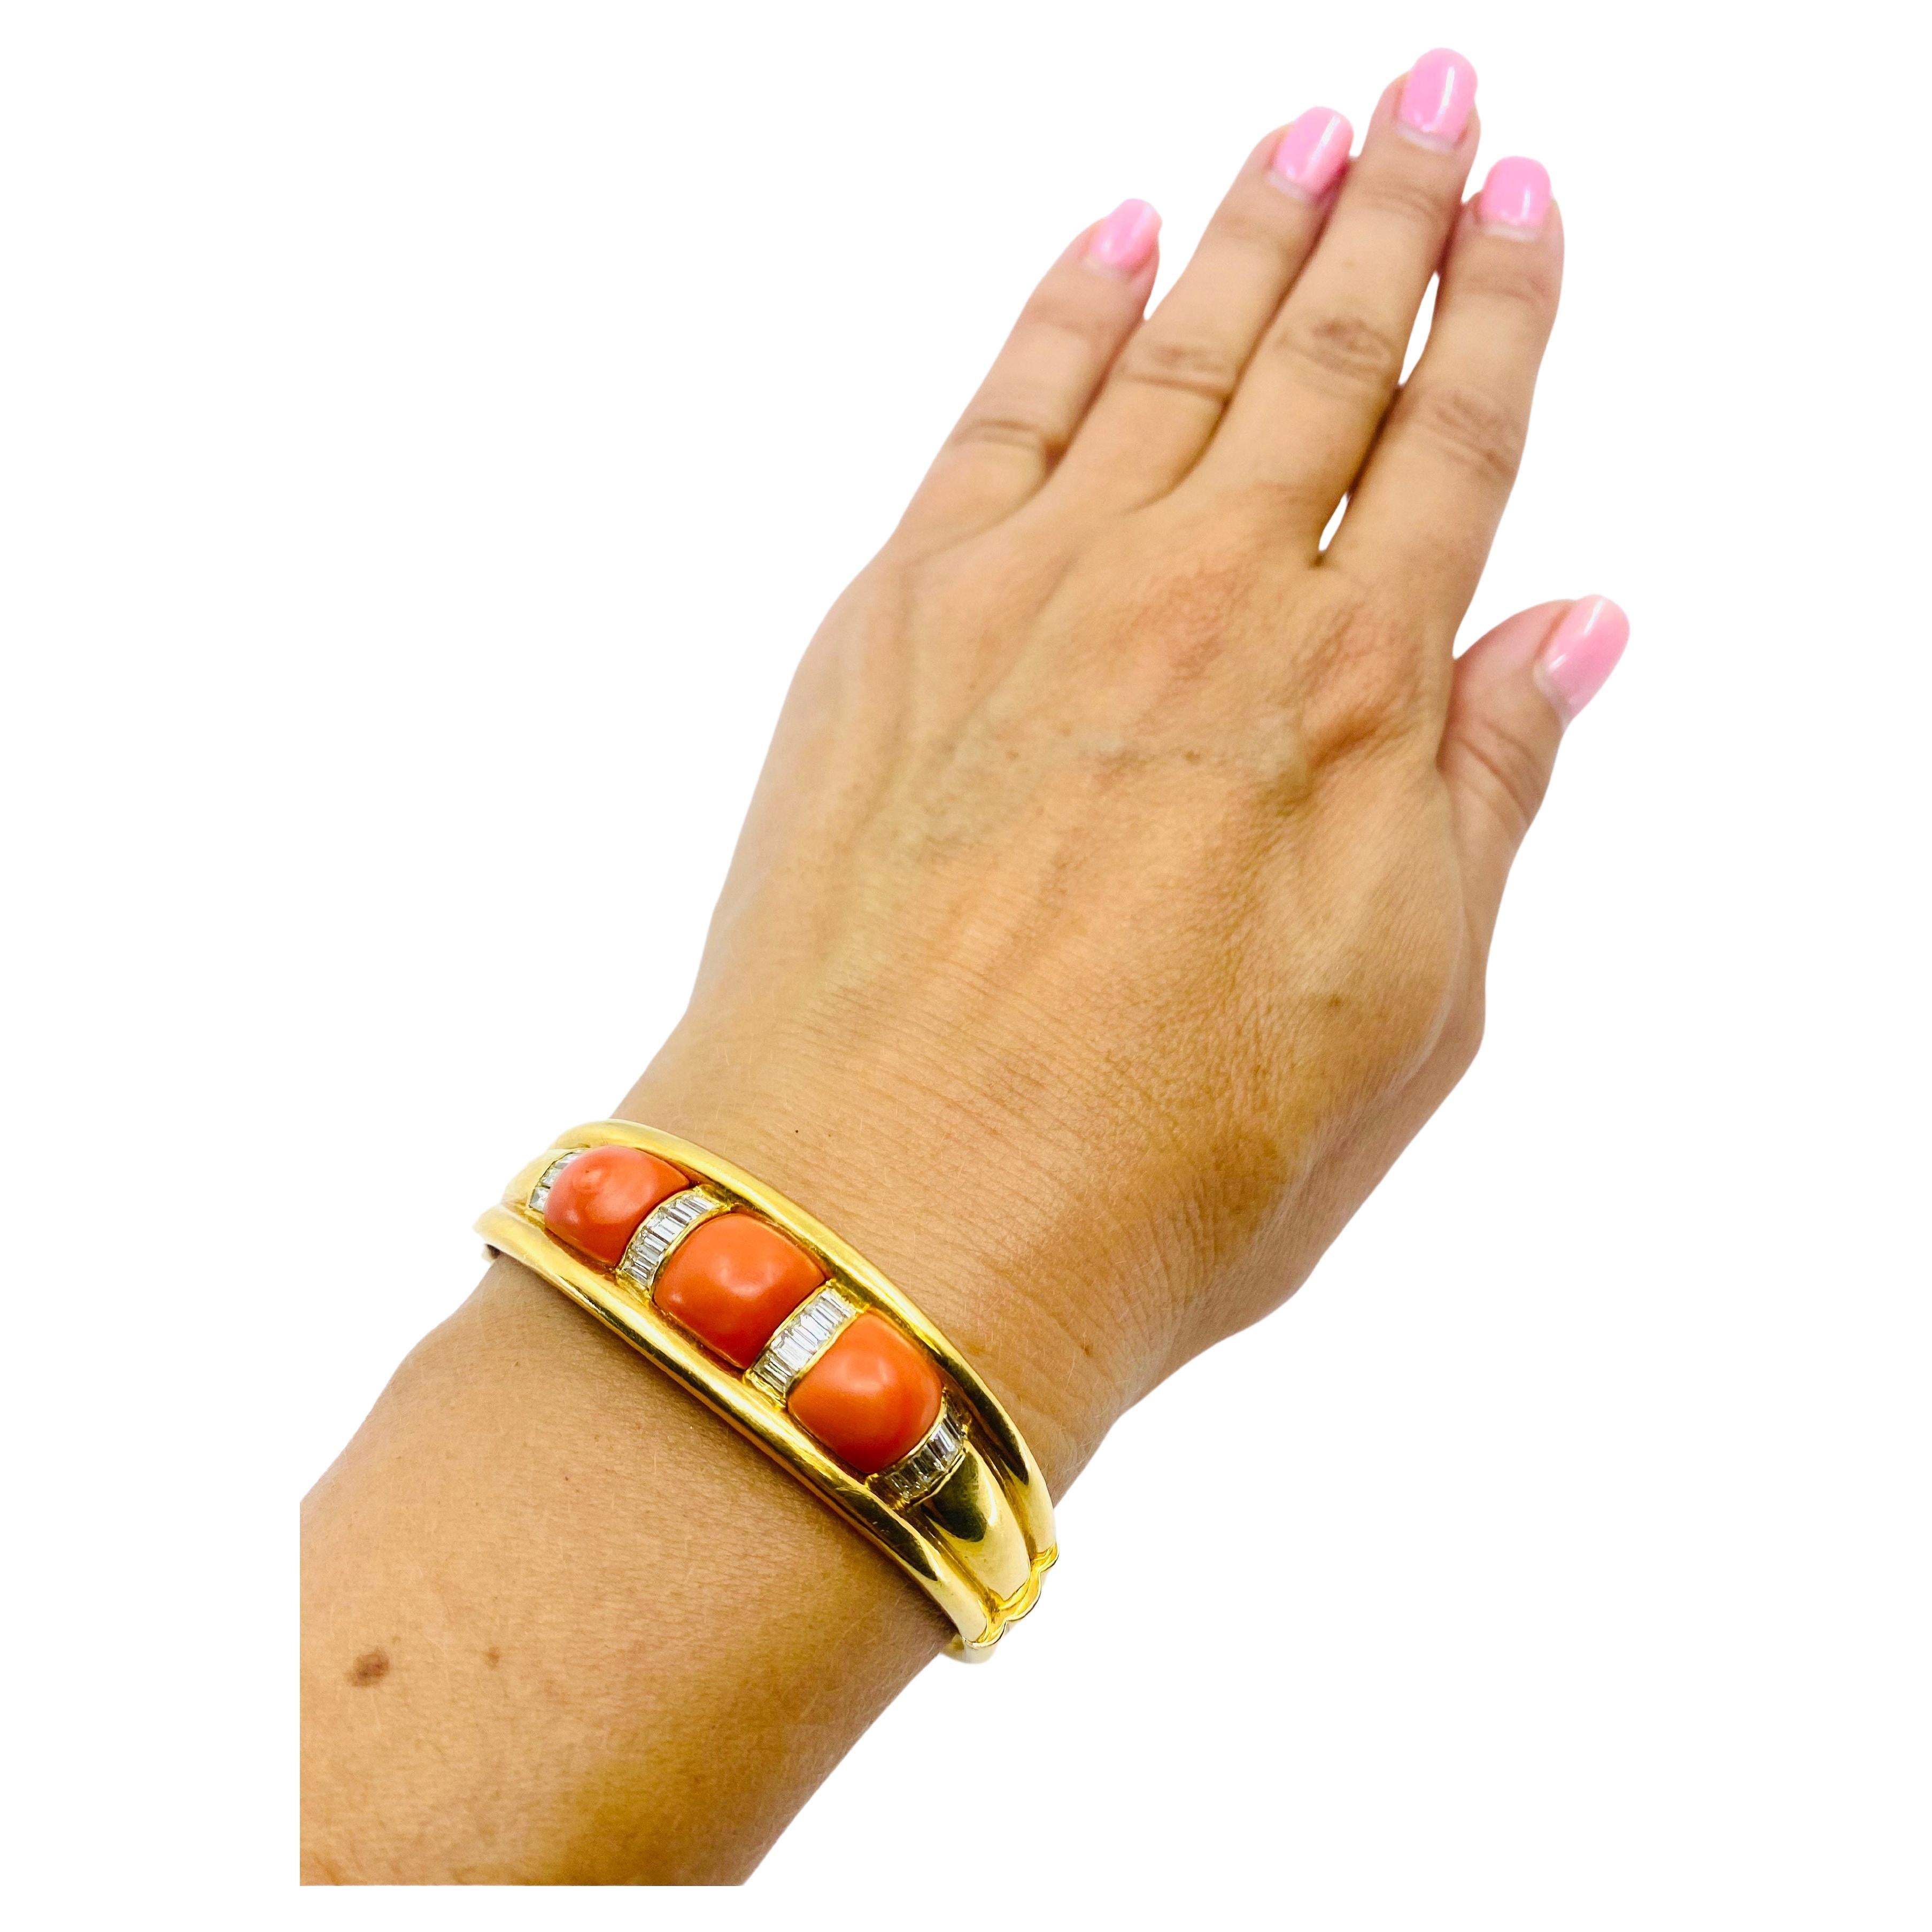 A vintage 18k gold bangle bracelet features coral and diamond. There are three cabochon cut corals arranged between four vertical diamond lines. The diamonds are baguette cut, beautifully staged by invisible setting. The bangle is fluted which